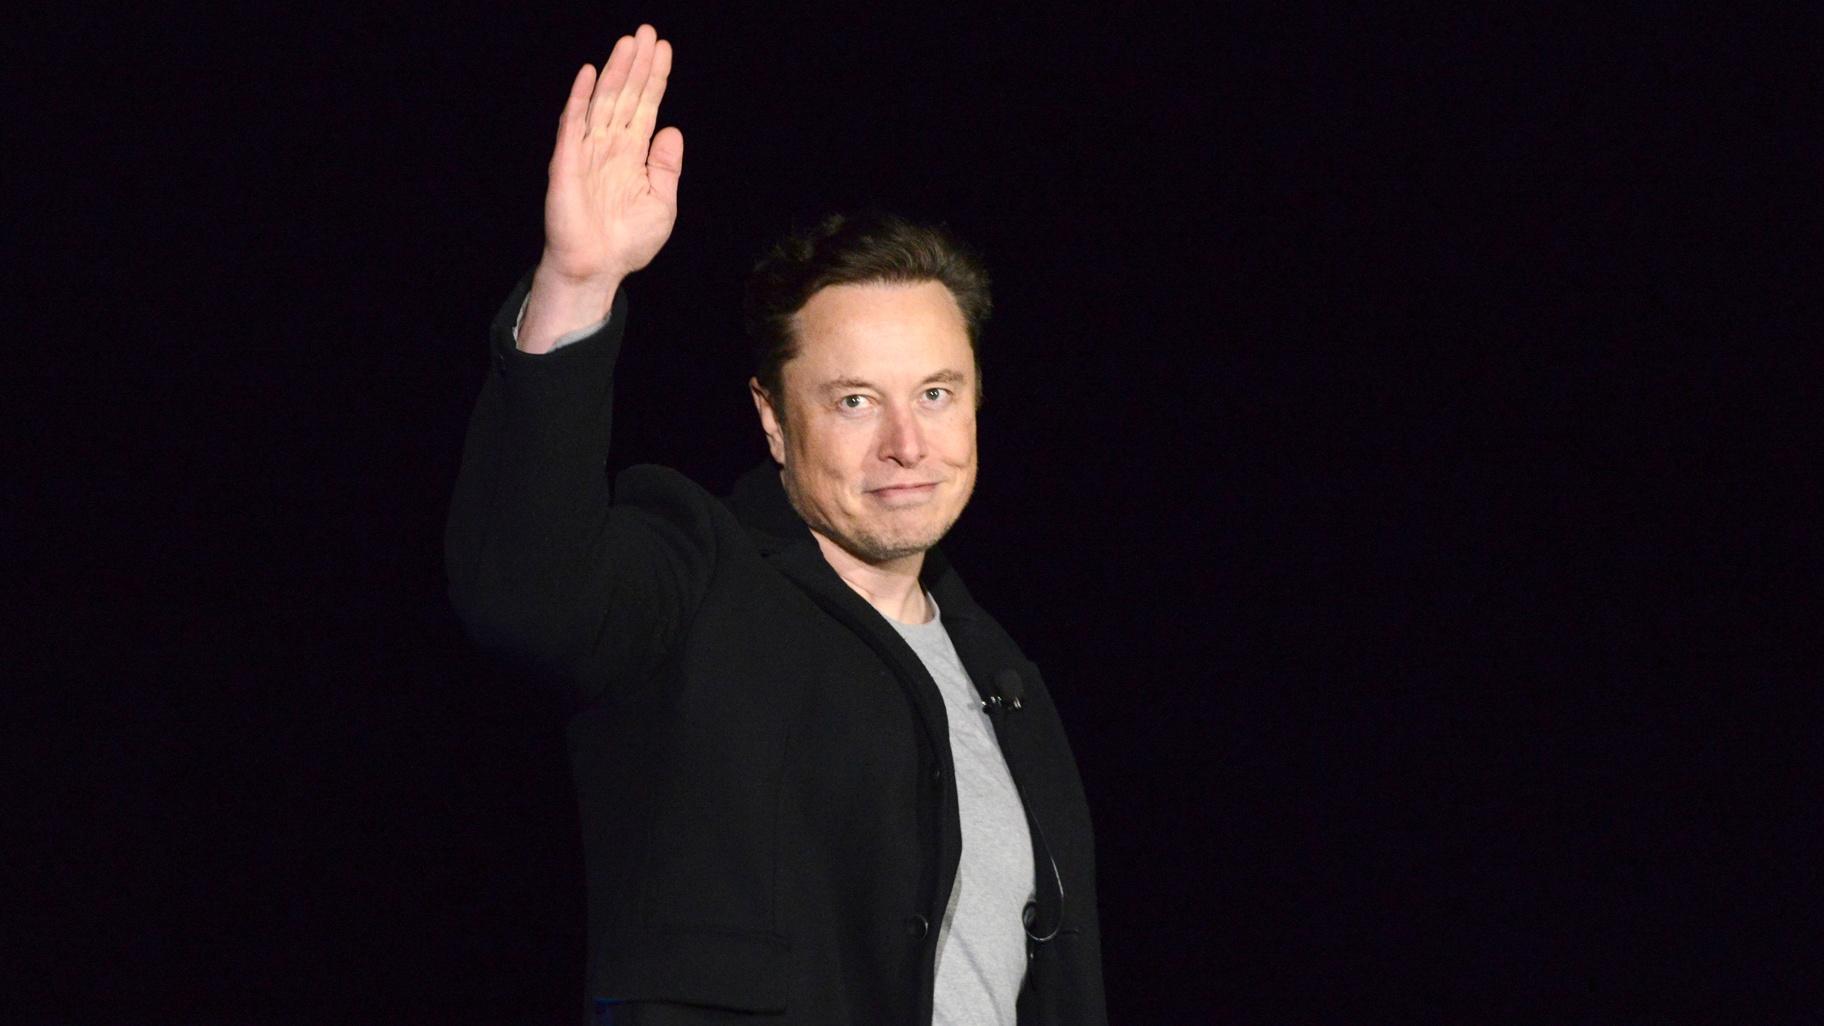 SpaceX’s Elon Musk waves while providing an update on Starship, on Feb. 10, 2022, near Brownsville, Texas. (Miguel Roberts / The Brownsville Herald via AP, File)